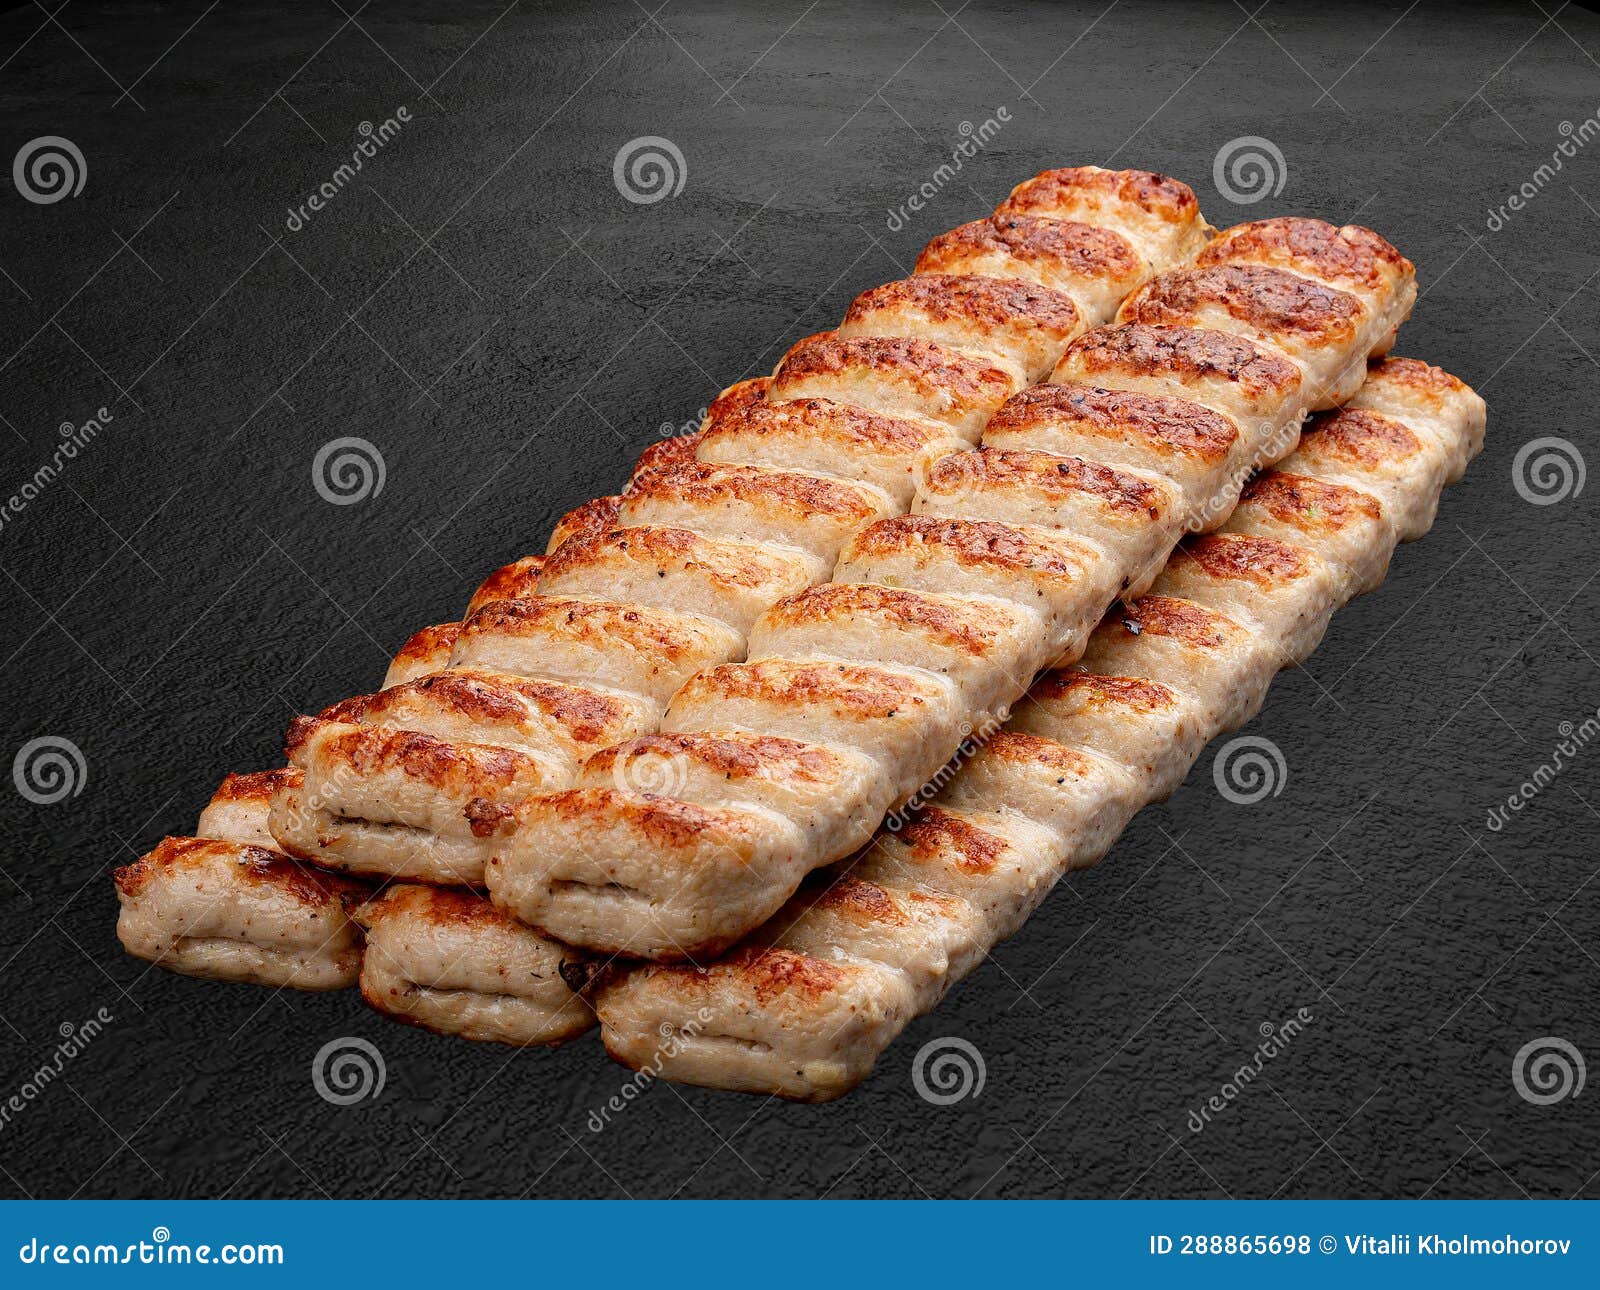 grilled chicken lulas. ground meat product. grill menu.  on a dark background